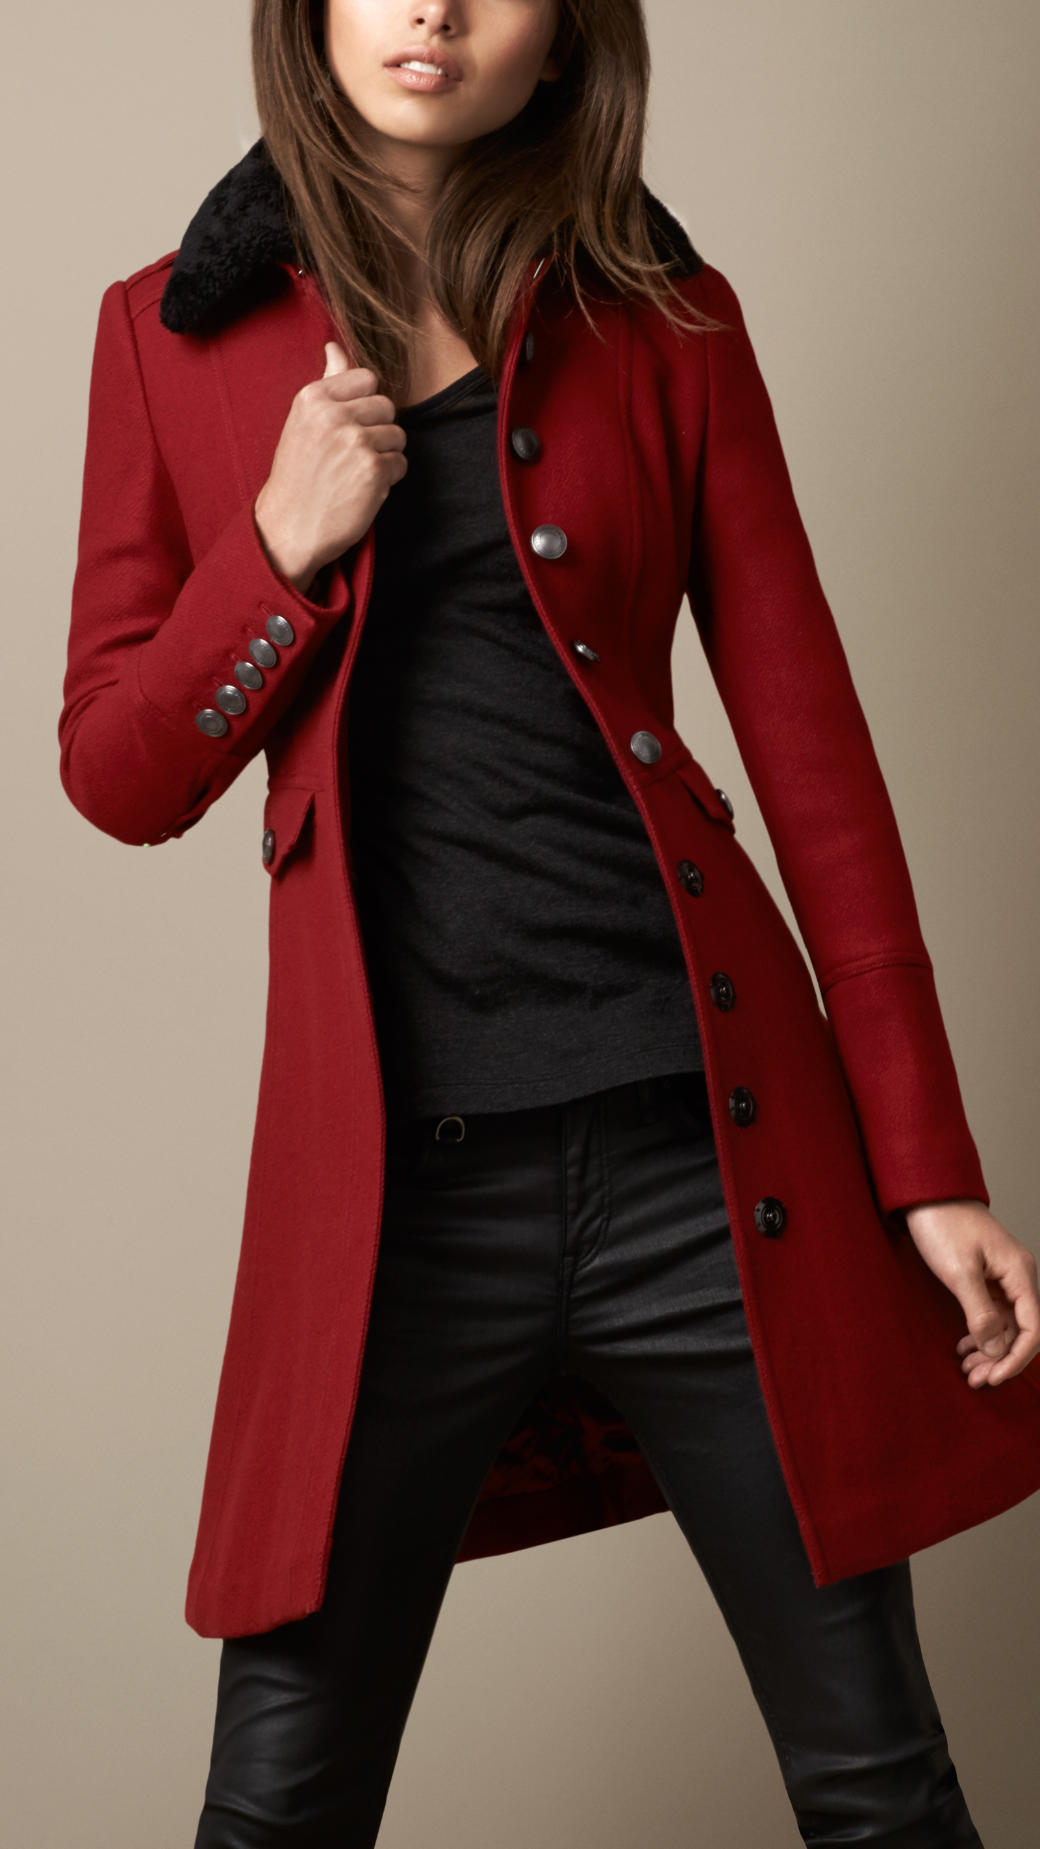 Lyst - Burberry Shearling Collar Military Coat in Red